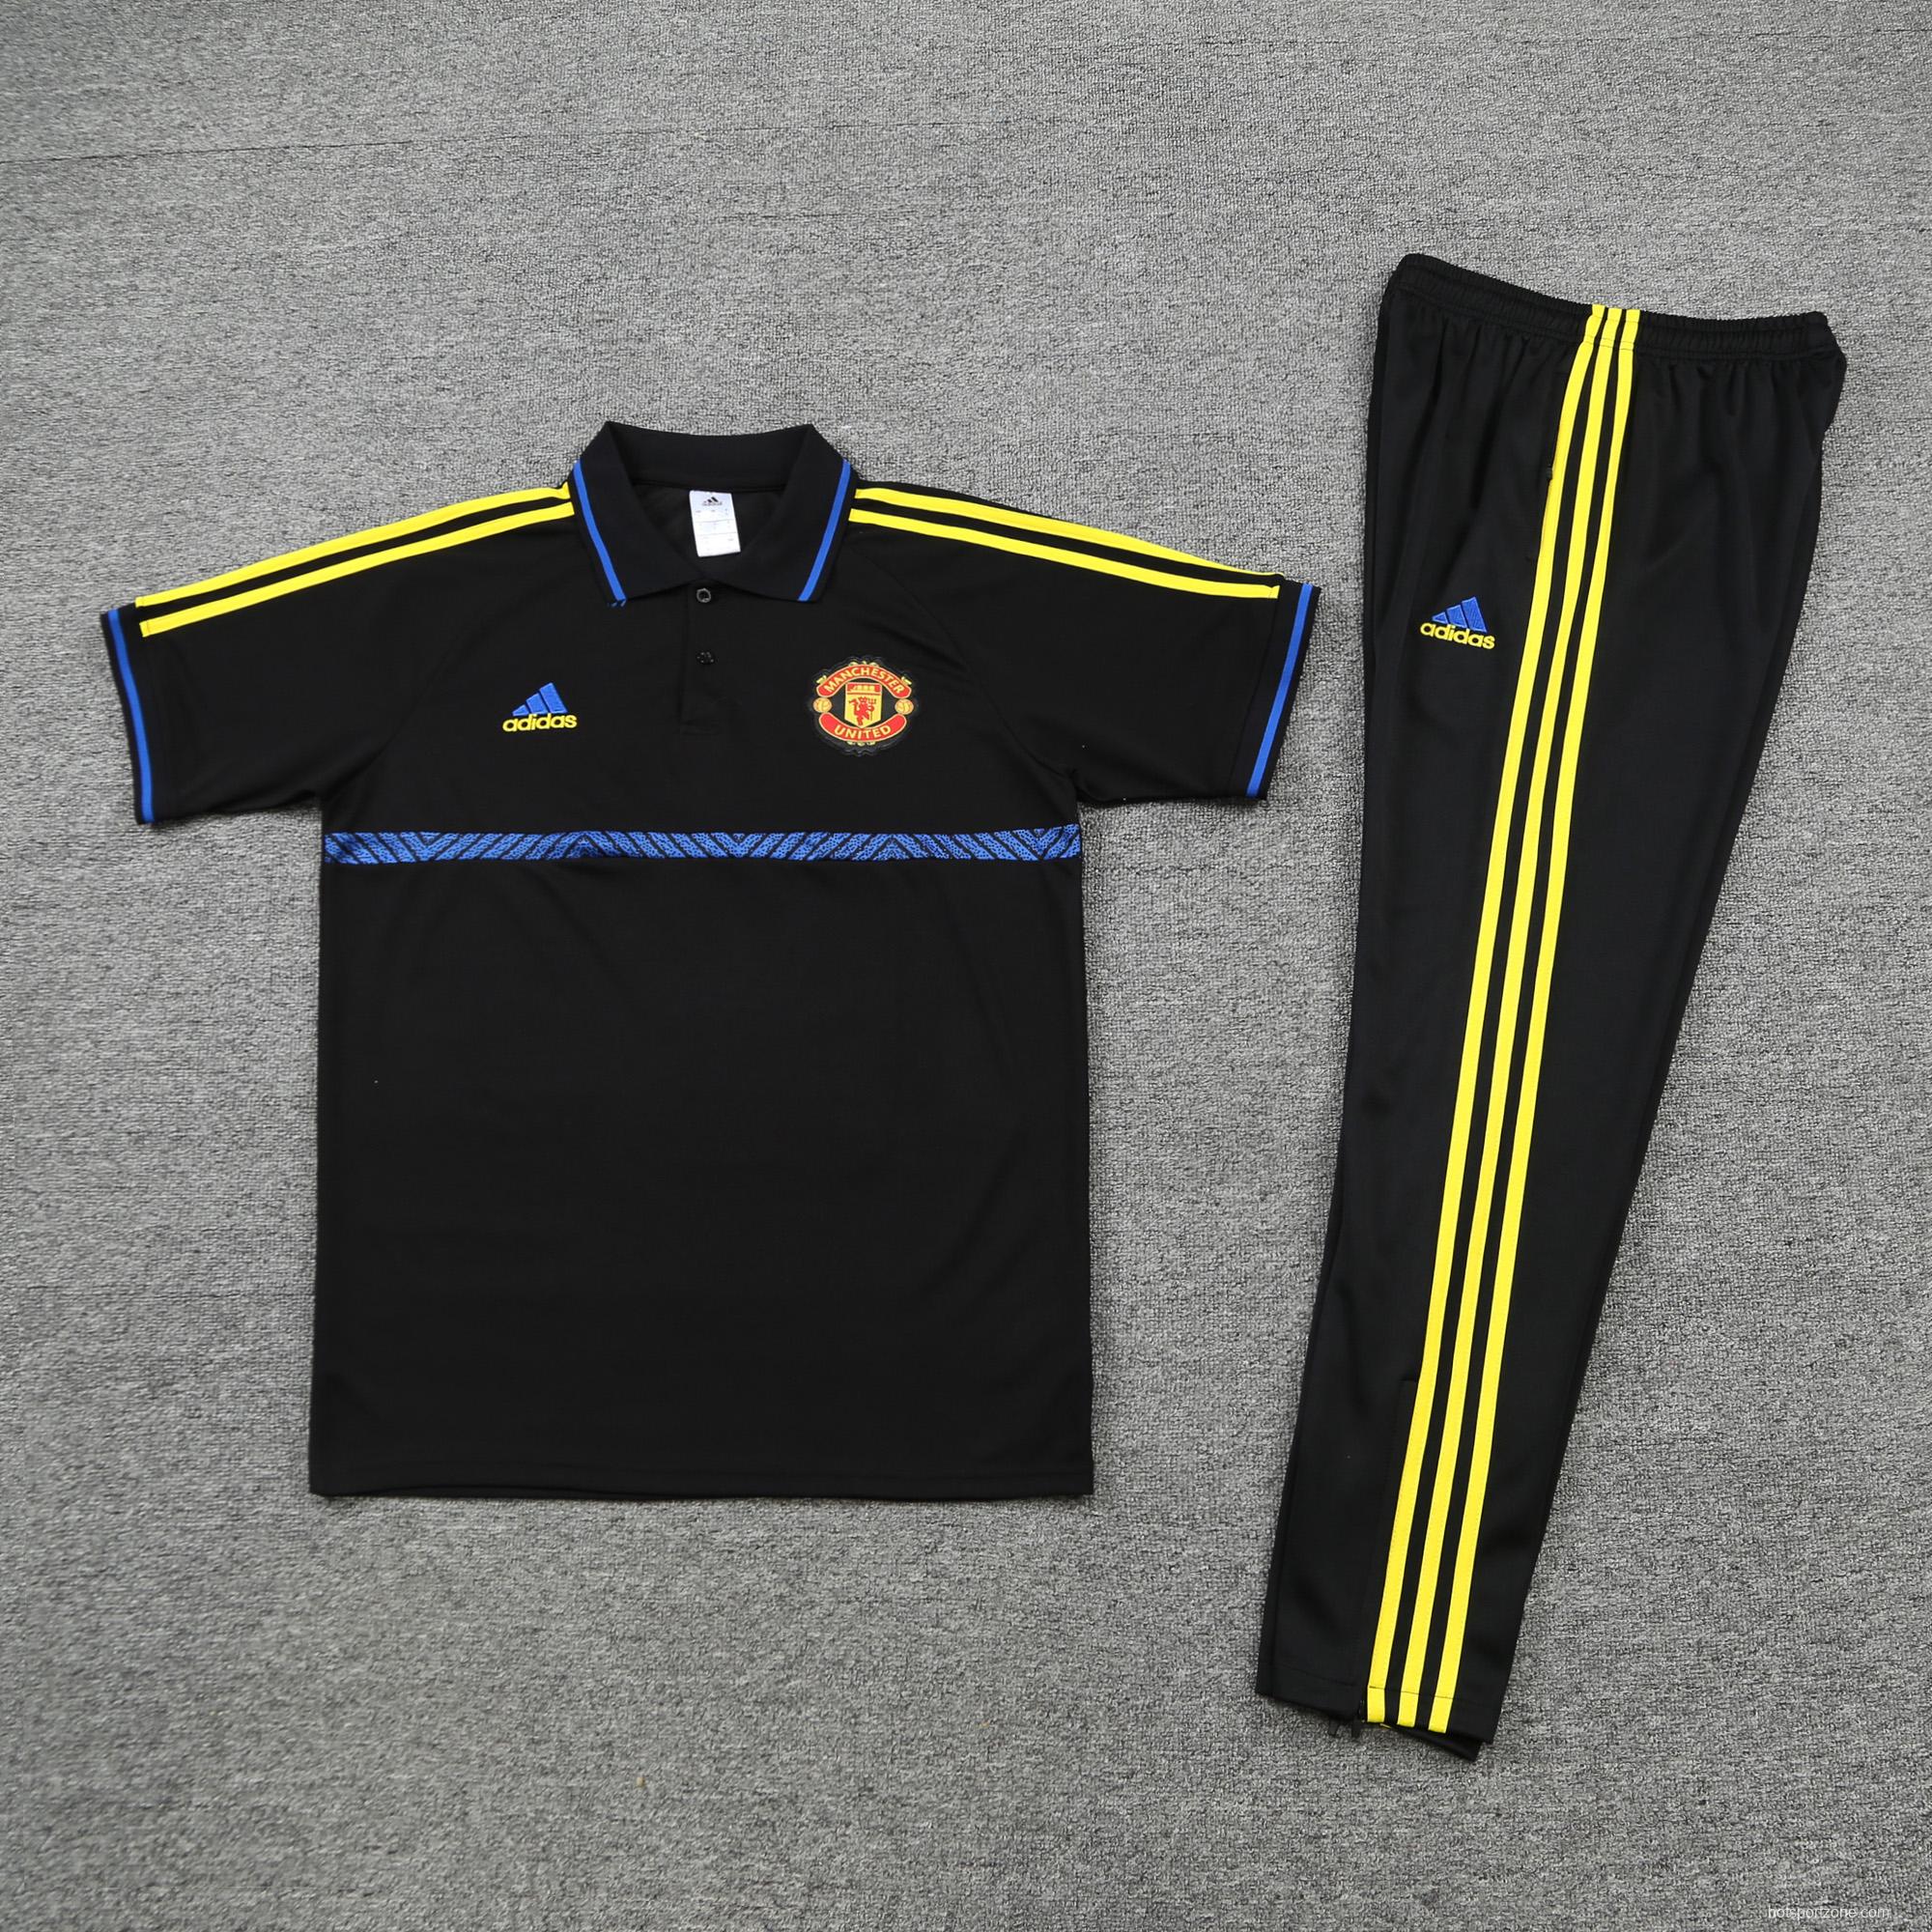 Manchester United POLO kit black and blue stripes(not supported to be sold separately)